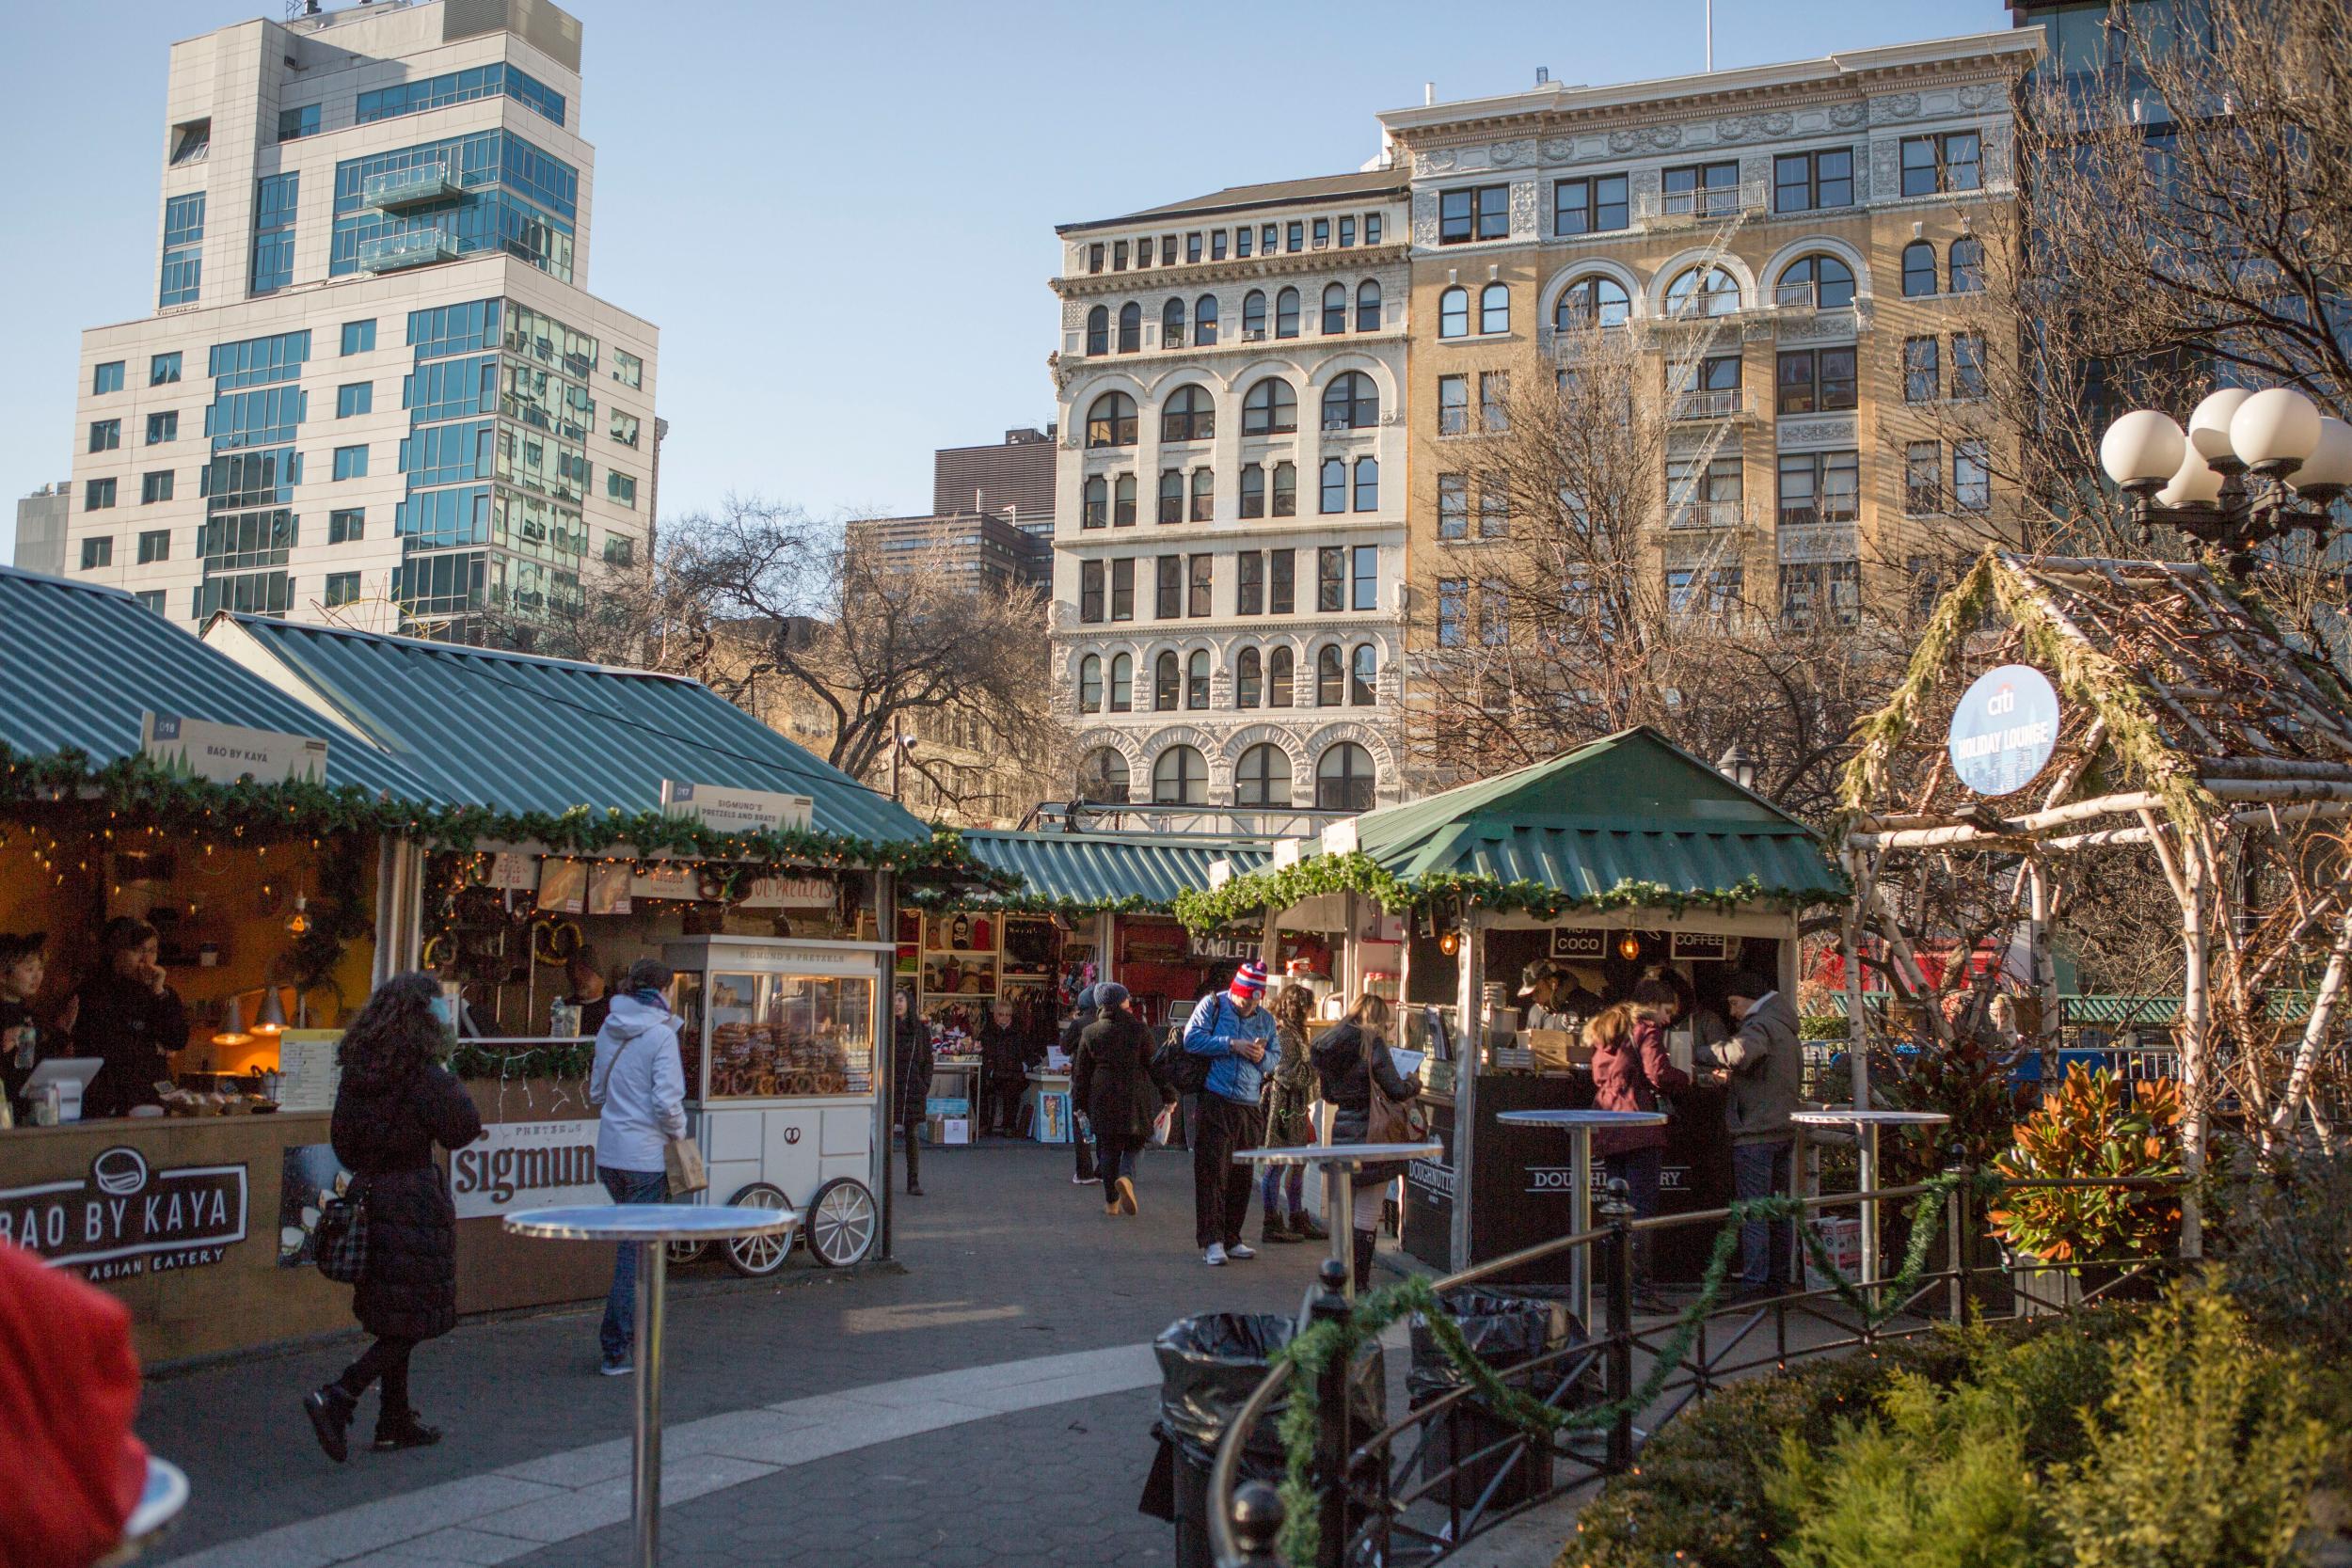 The holiday market at Union Square